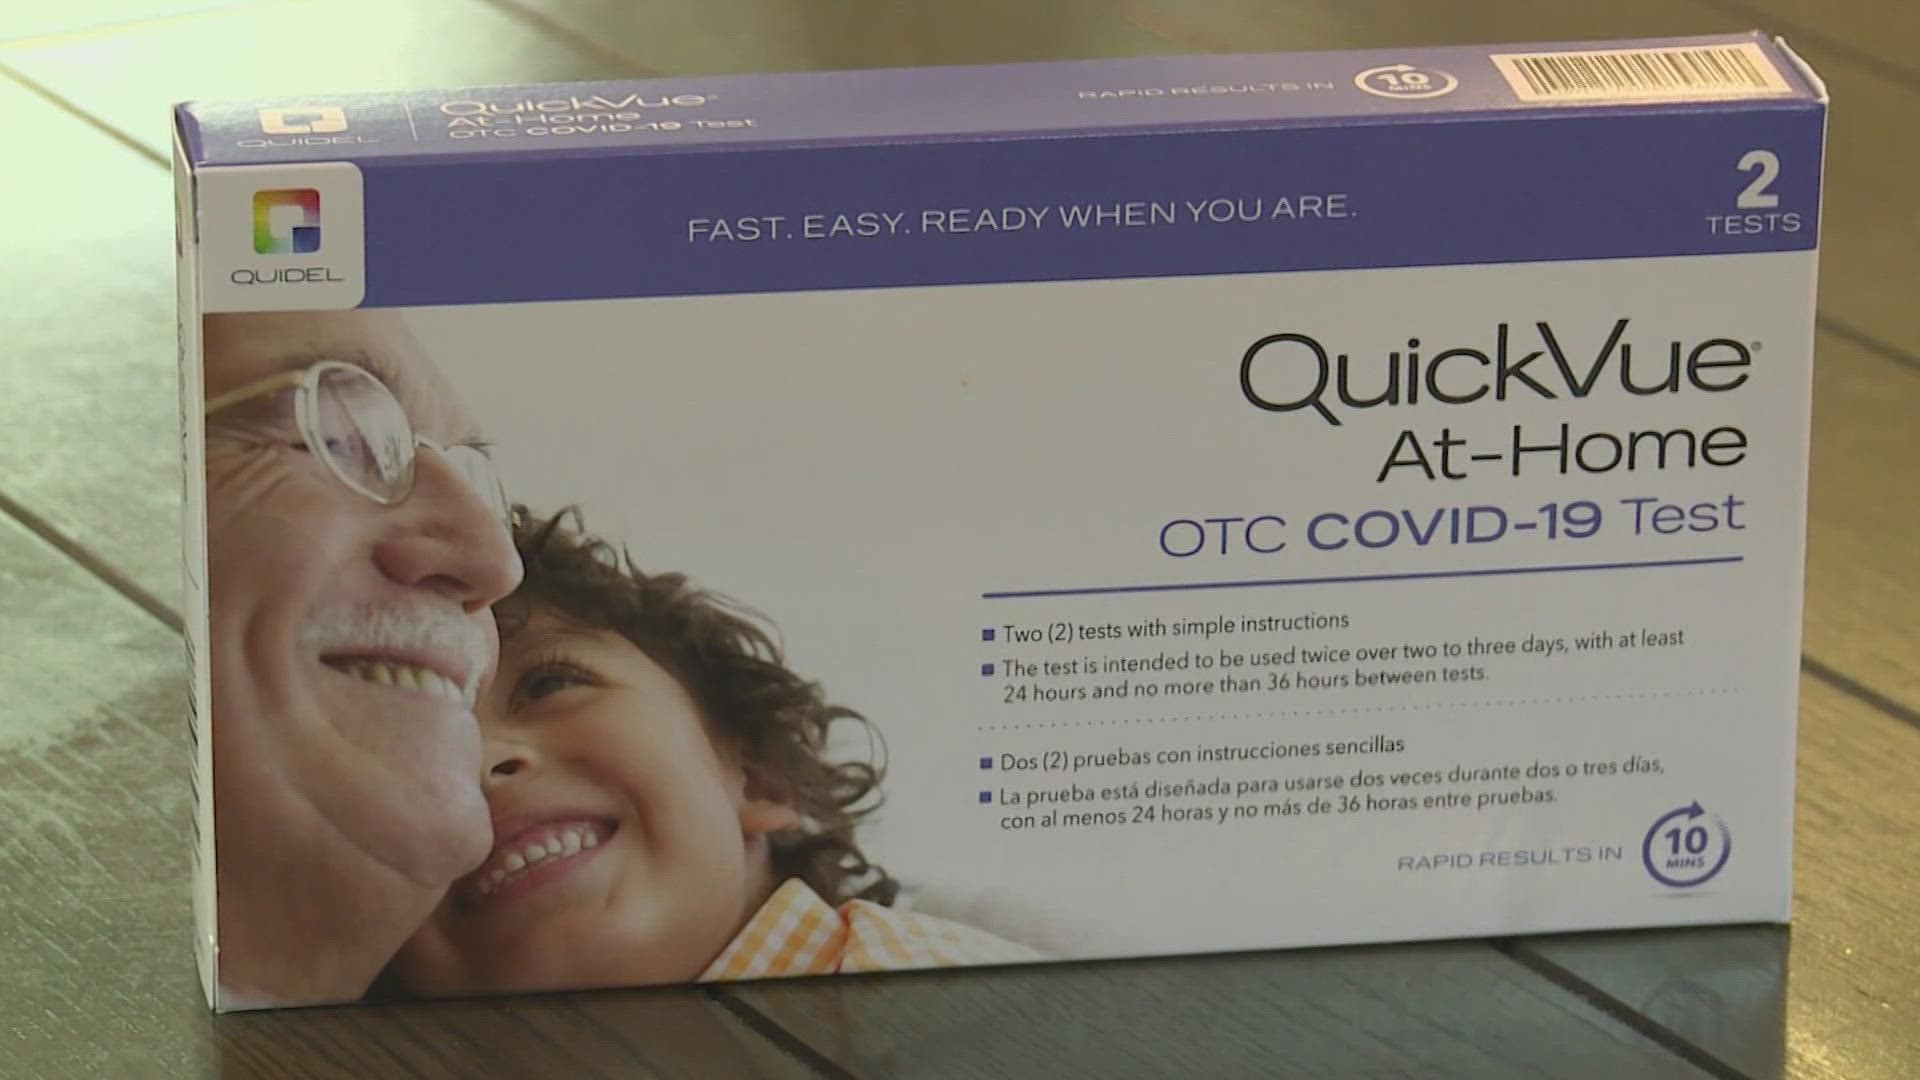 Spokane Regional Health District began distributing at-home Say Yes! COVID-19 tests in November. Now, those tests are almost out.